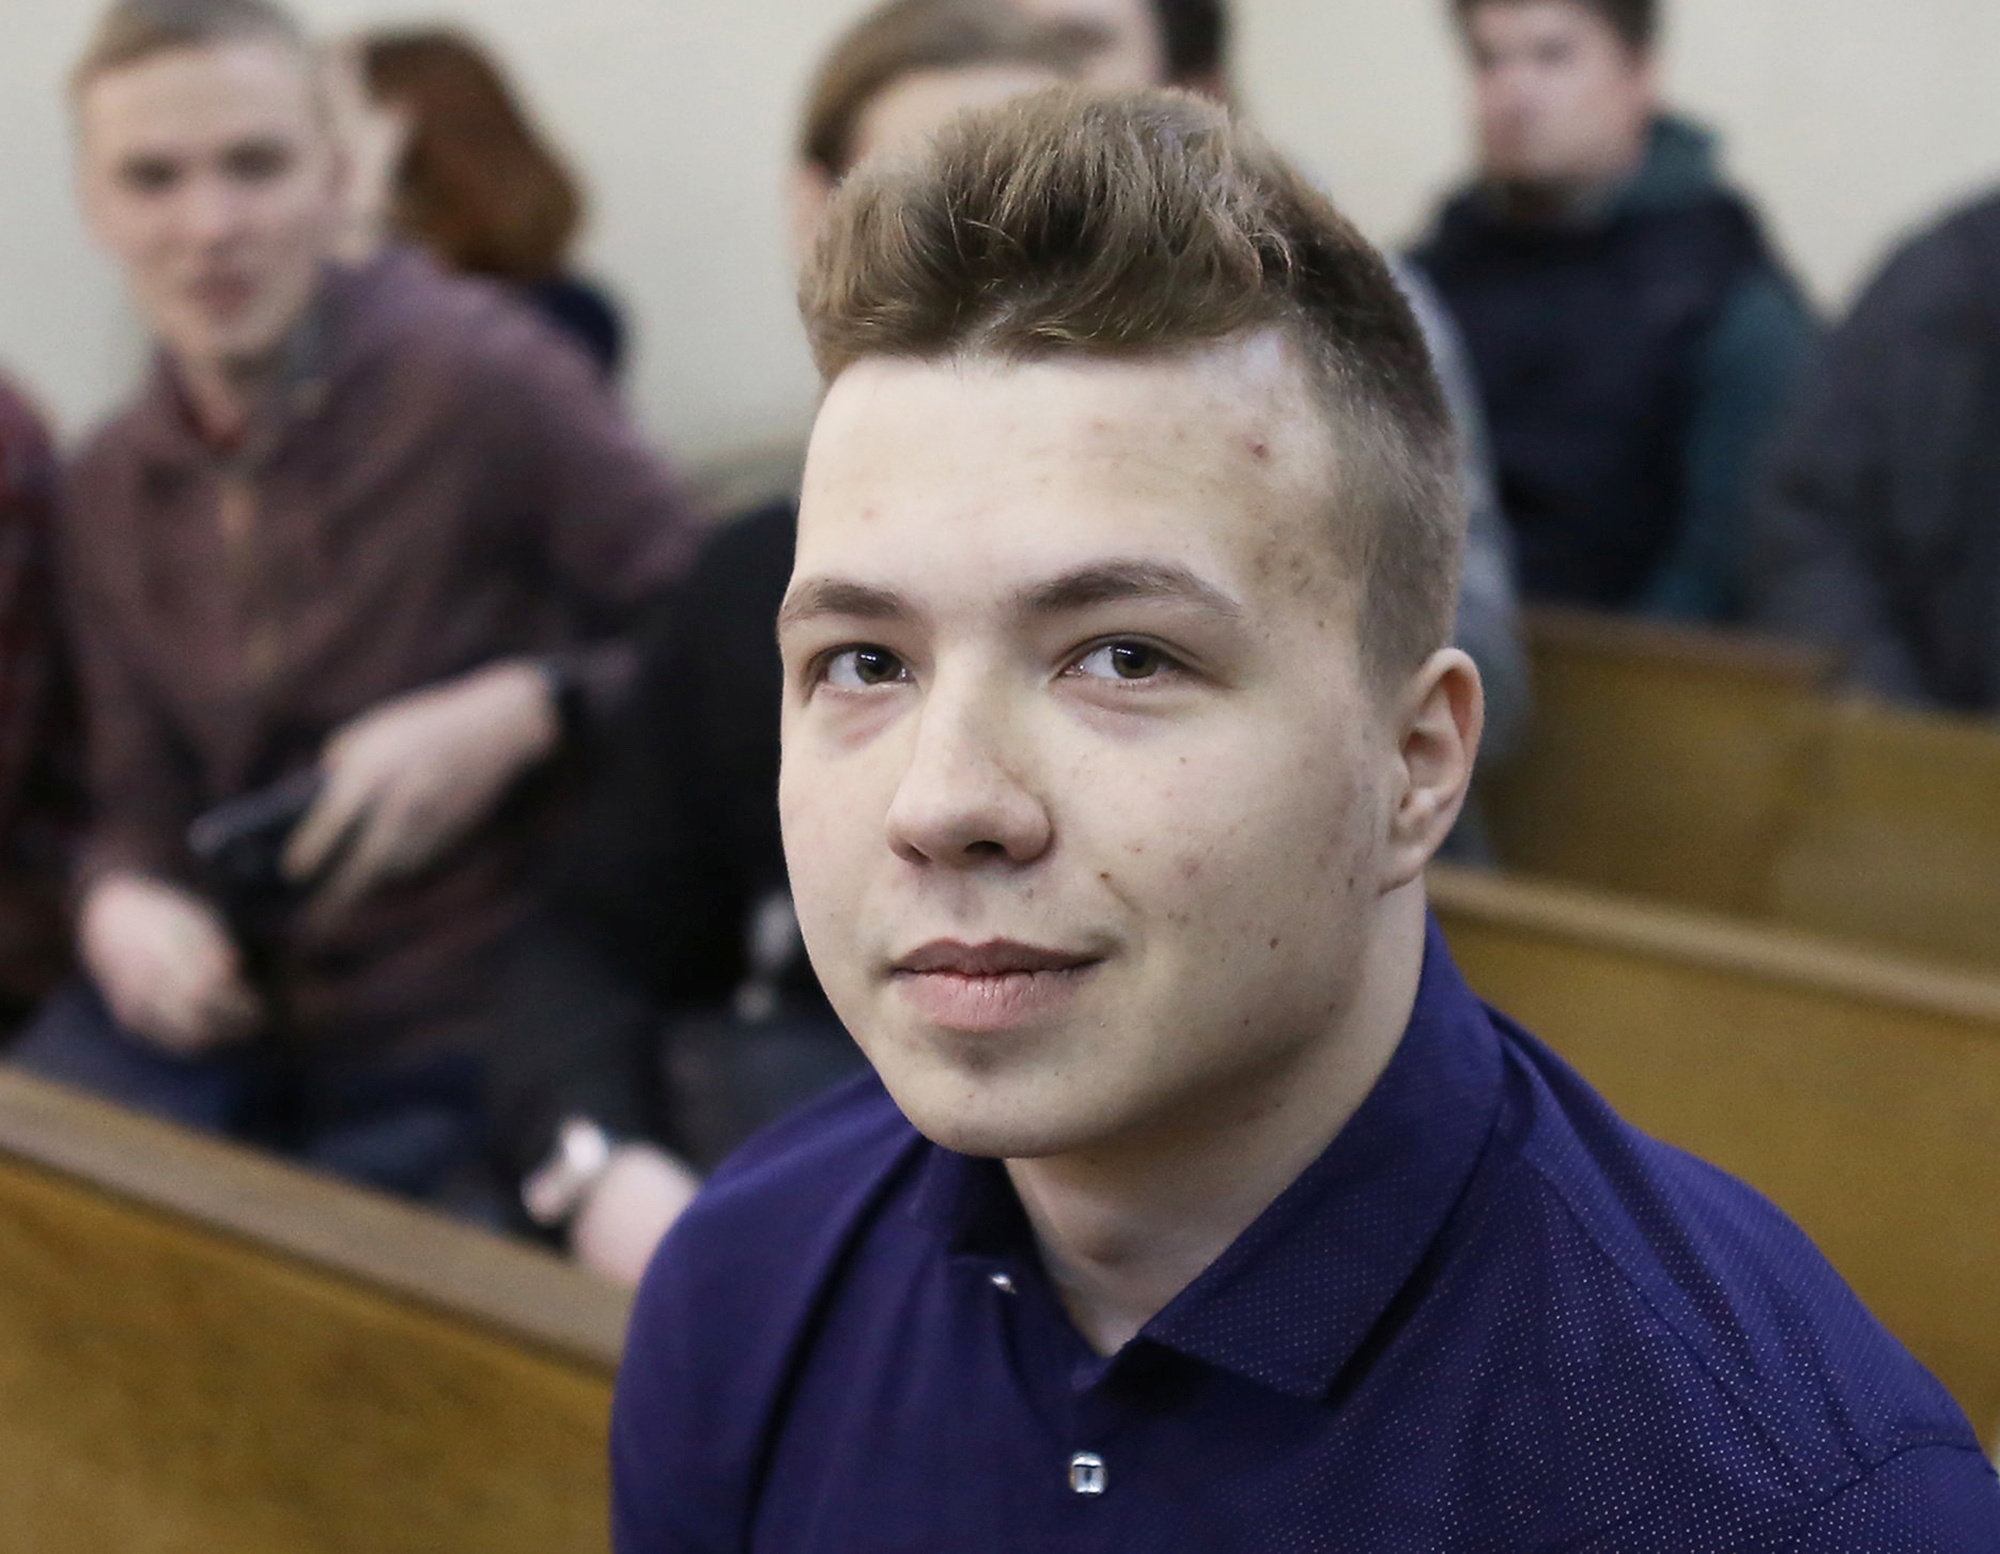 Opposition blogger and activist Roman Protasevich attends a court hearing in Minsk